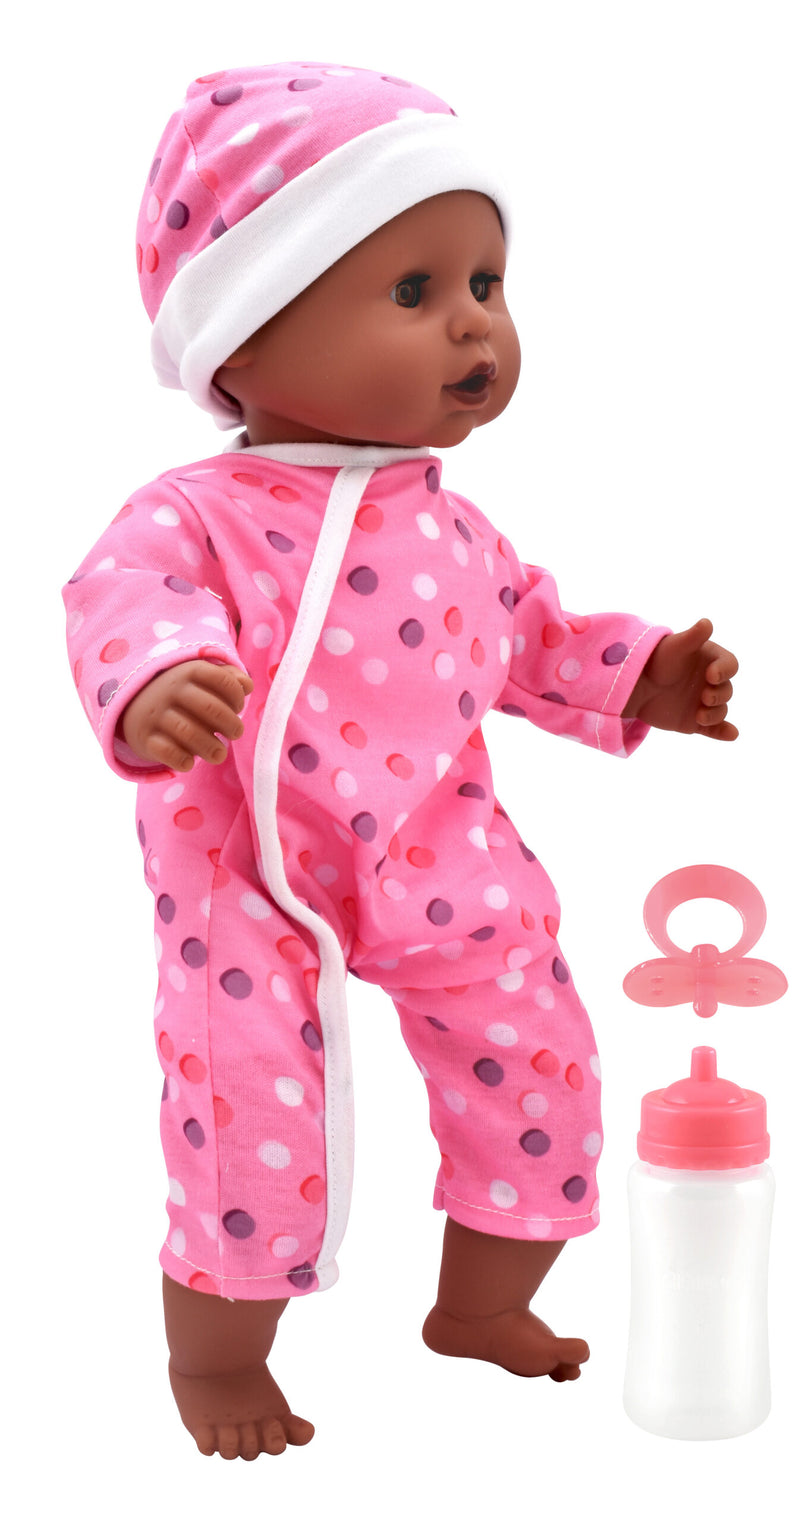 Dollsworld Pink Baby Joy African Girl Doll 38cm (15") with Accessories (7769886261403)